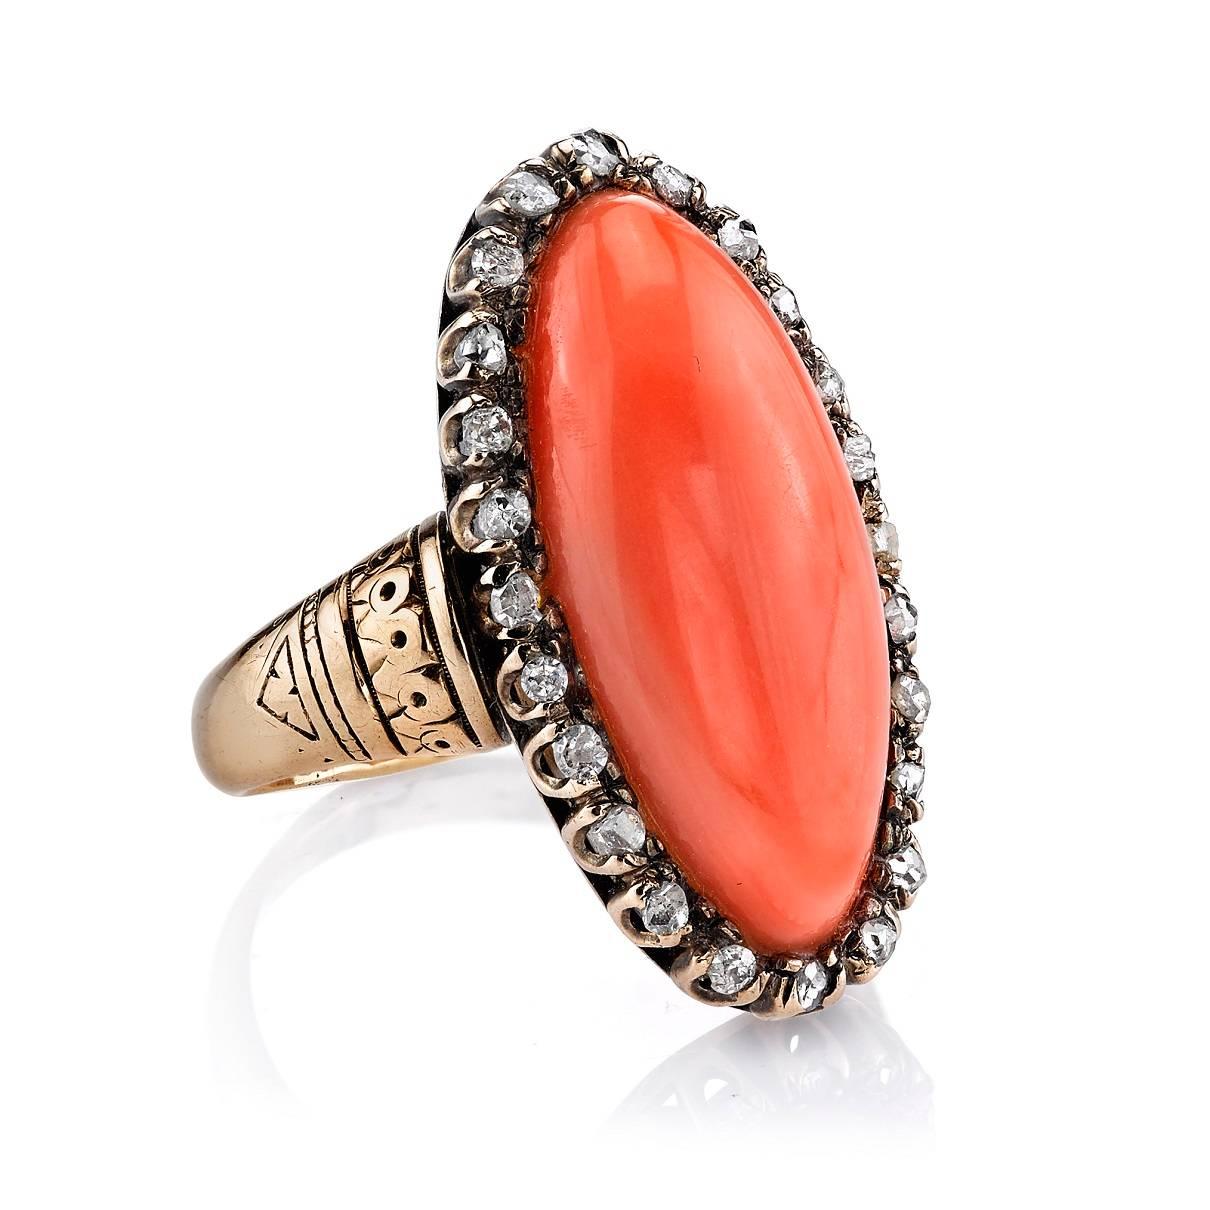 Coral with 0.25ctw Rose cut diamond surround set in a vintage 10k yellow gold mounting. Circa 1890.